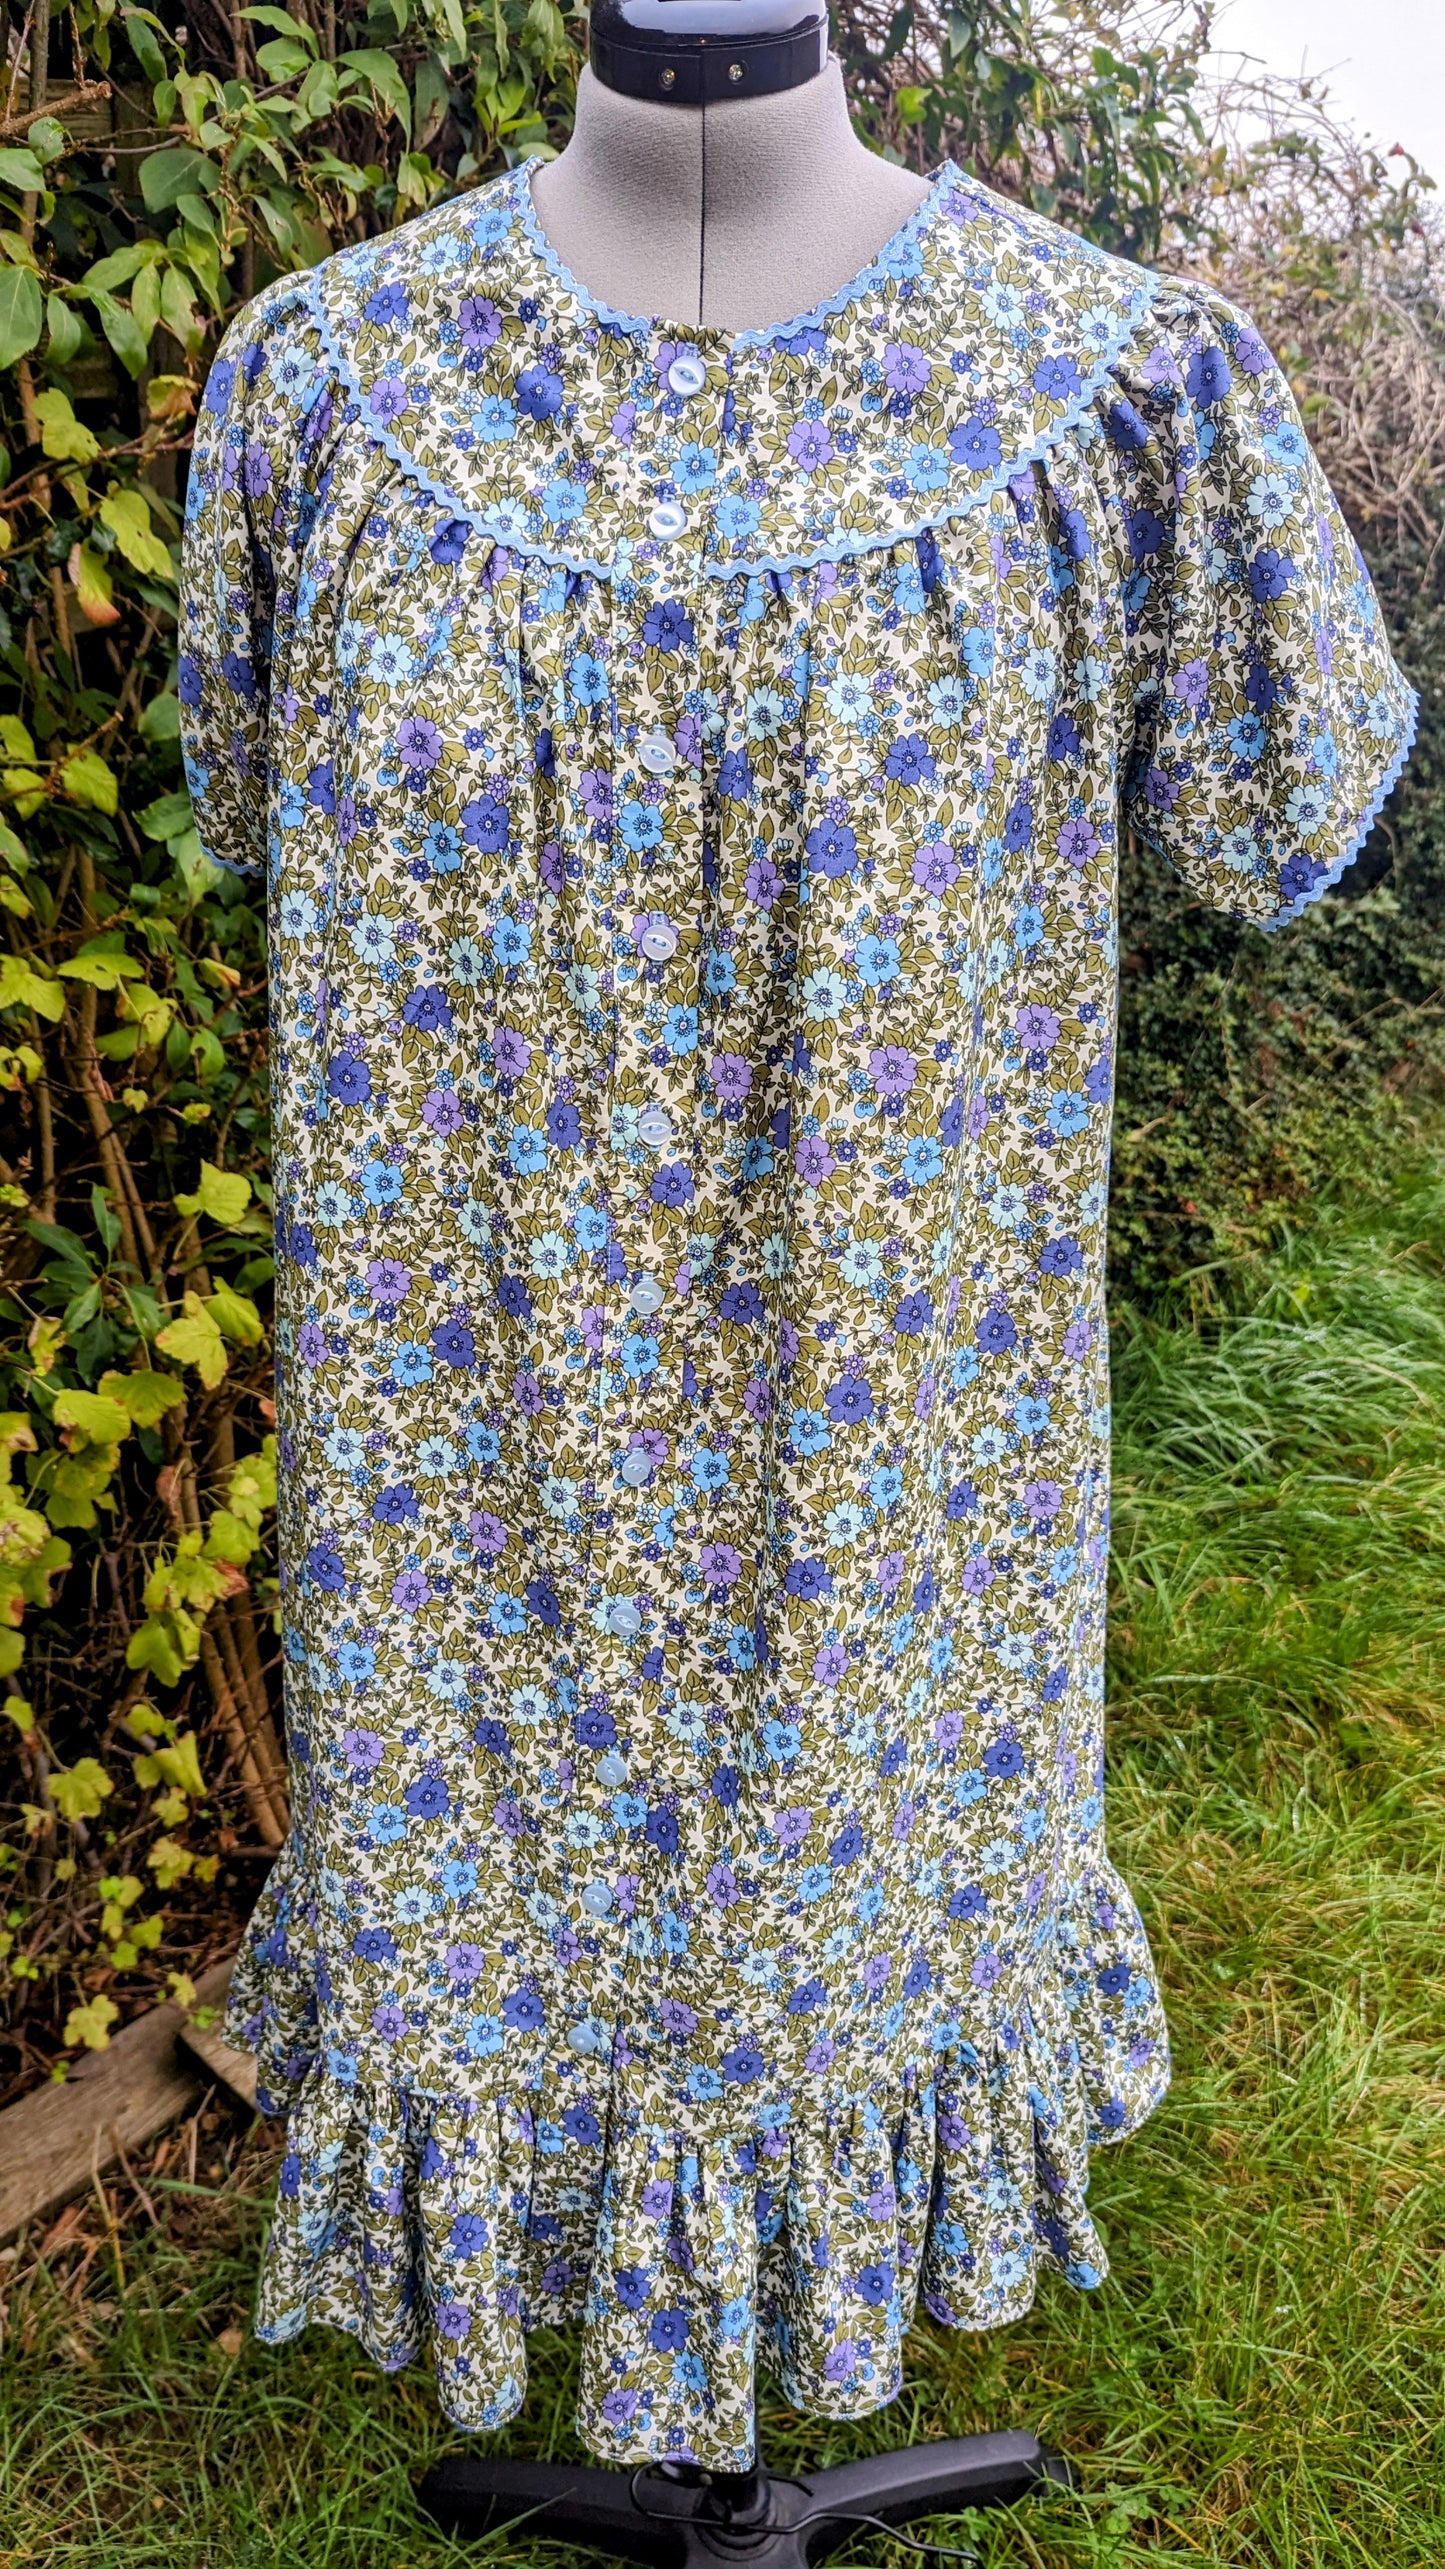 Wendy's Choice, Floral House Dress